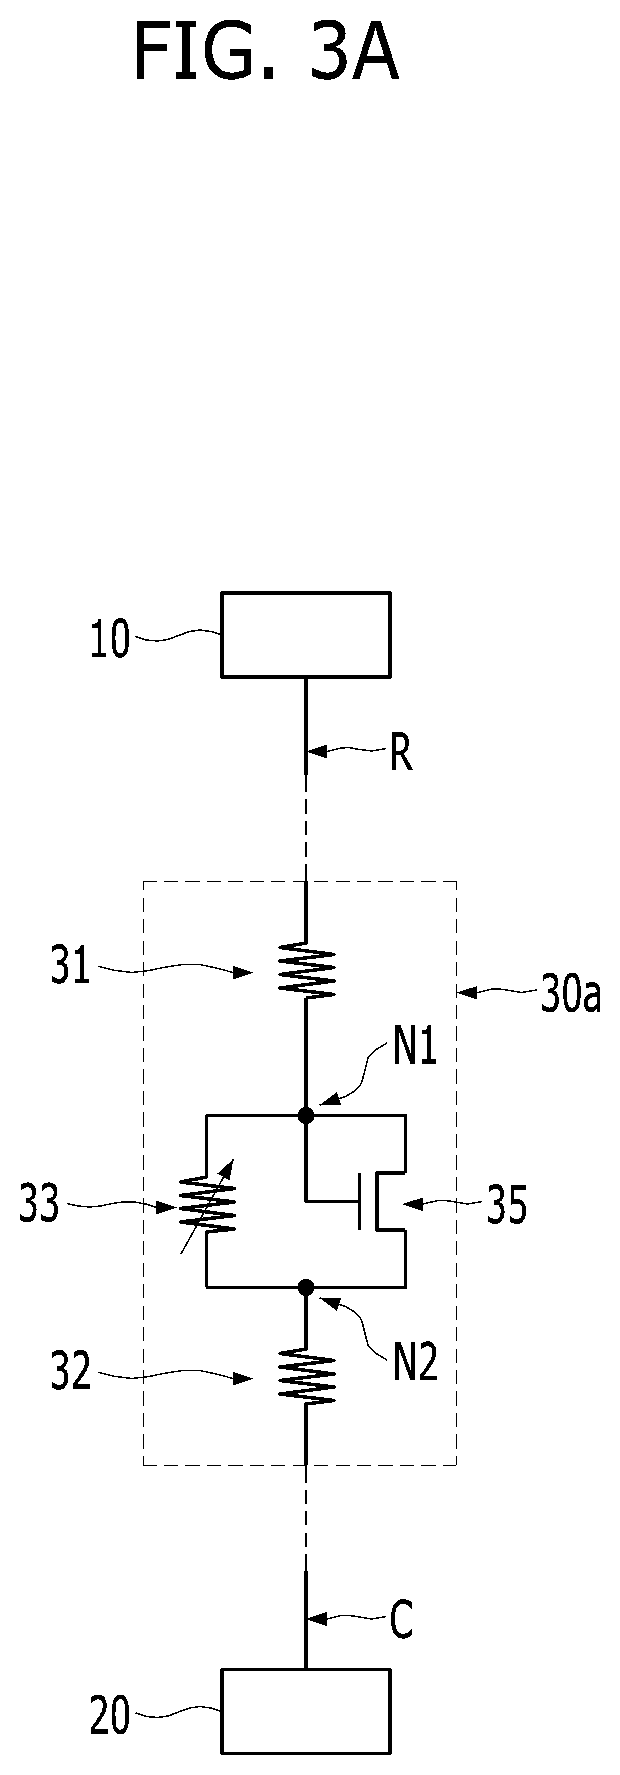 Neuromorphic device including a synapse having a variable resistor and a transistor connected in parallel with each other